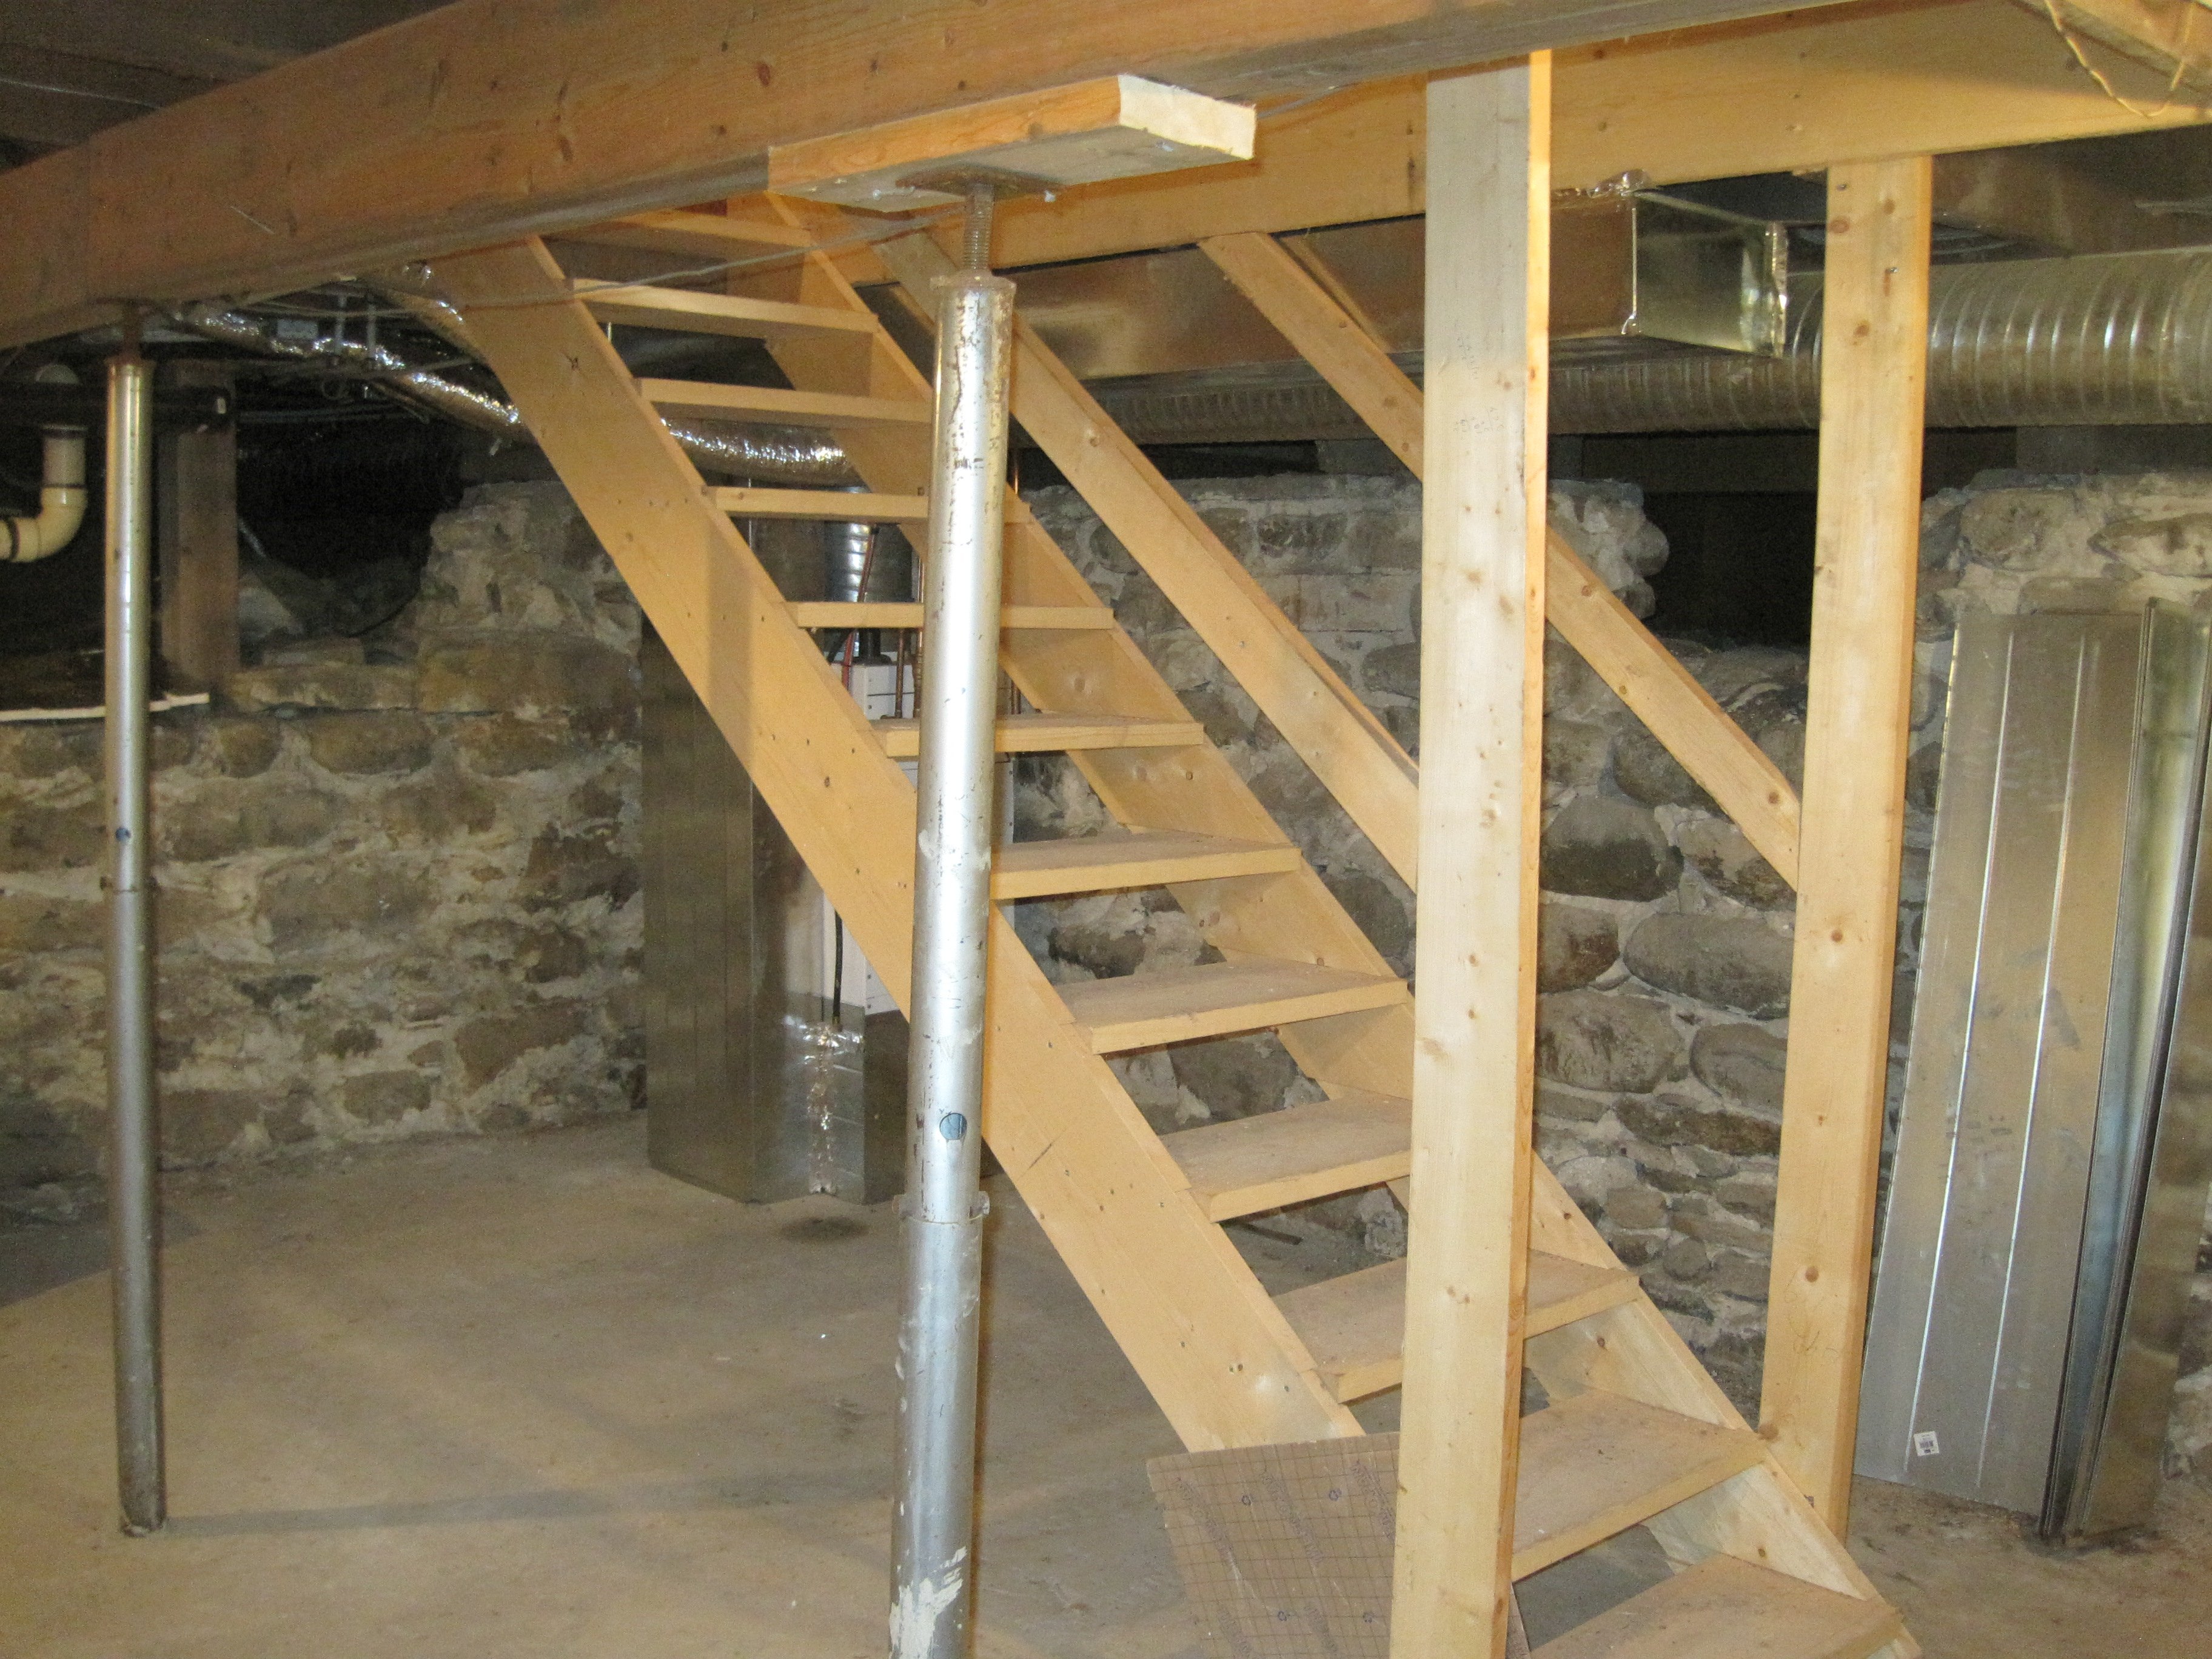 Basement of the OBH. Note the original stone foundation! 
Photo Credit: Wendy Quist